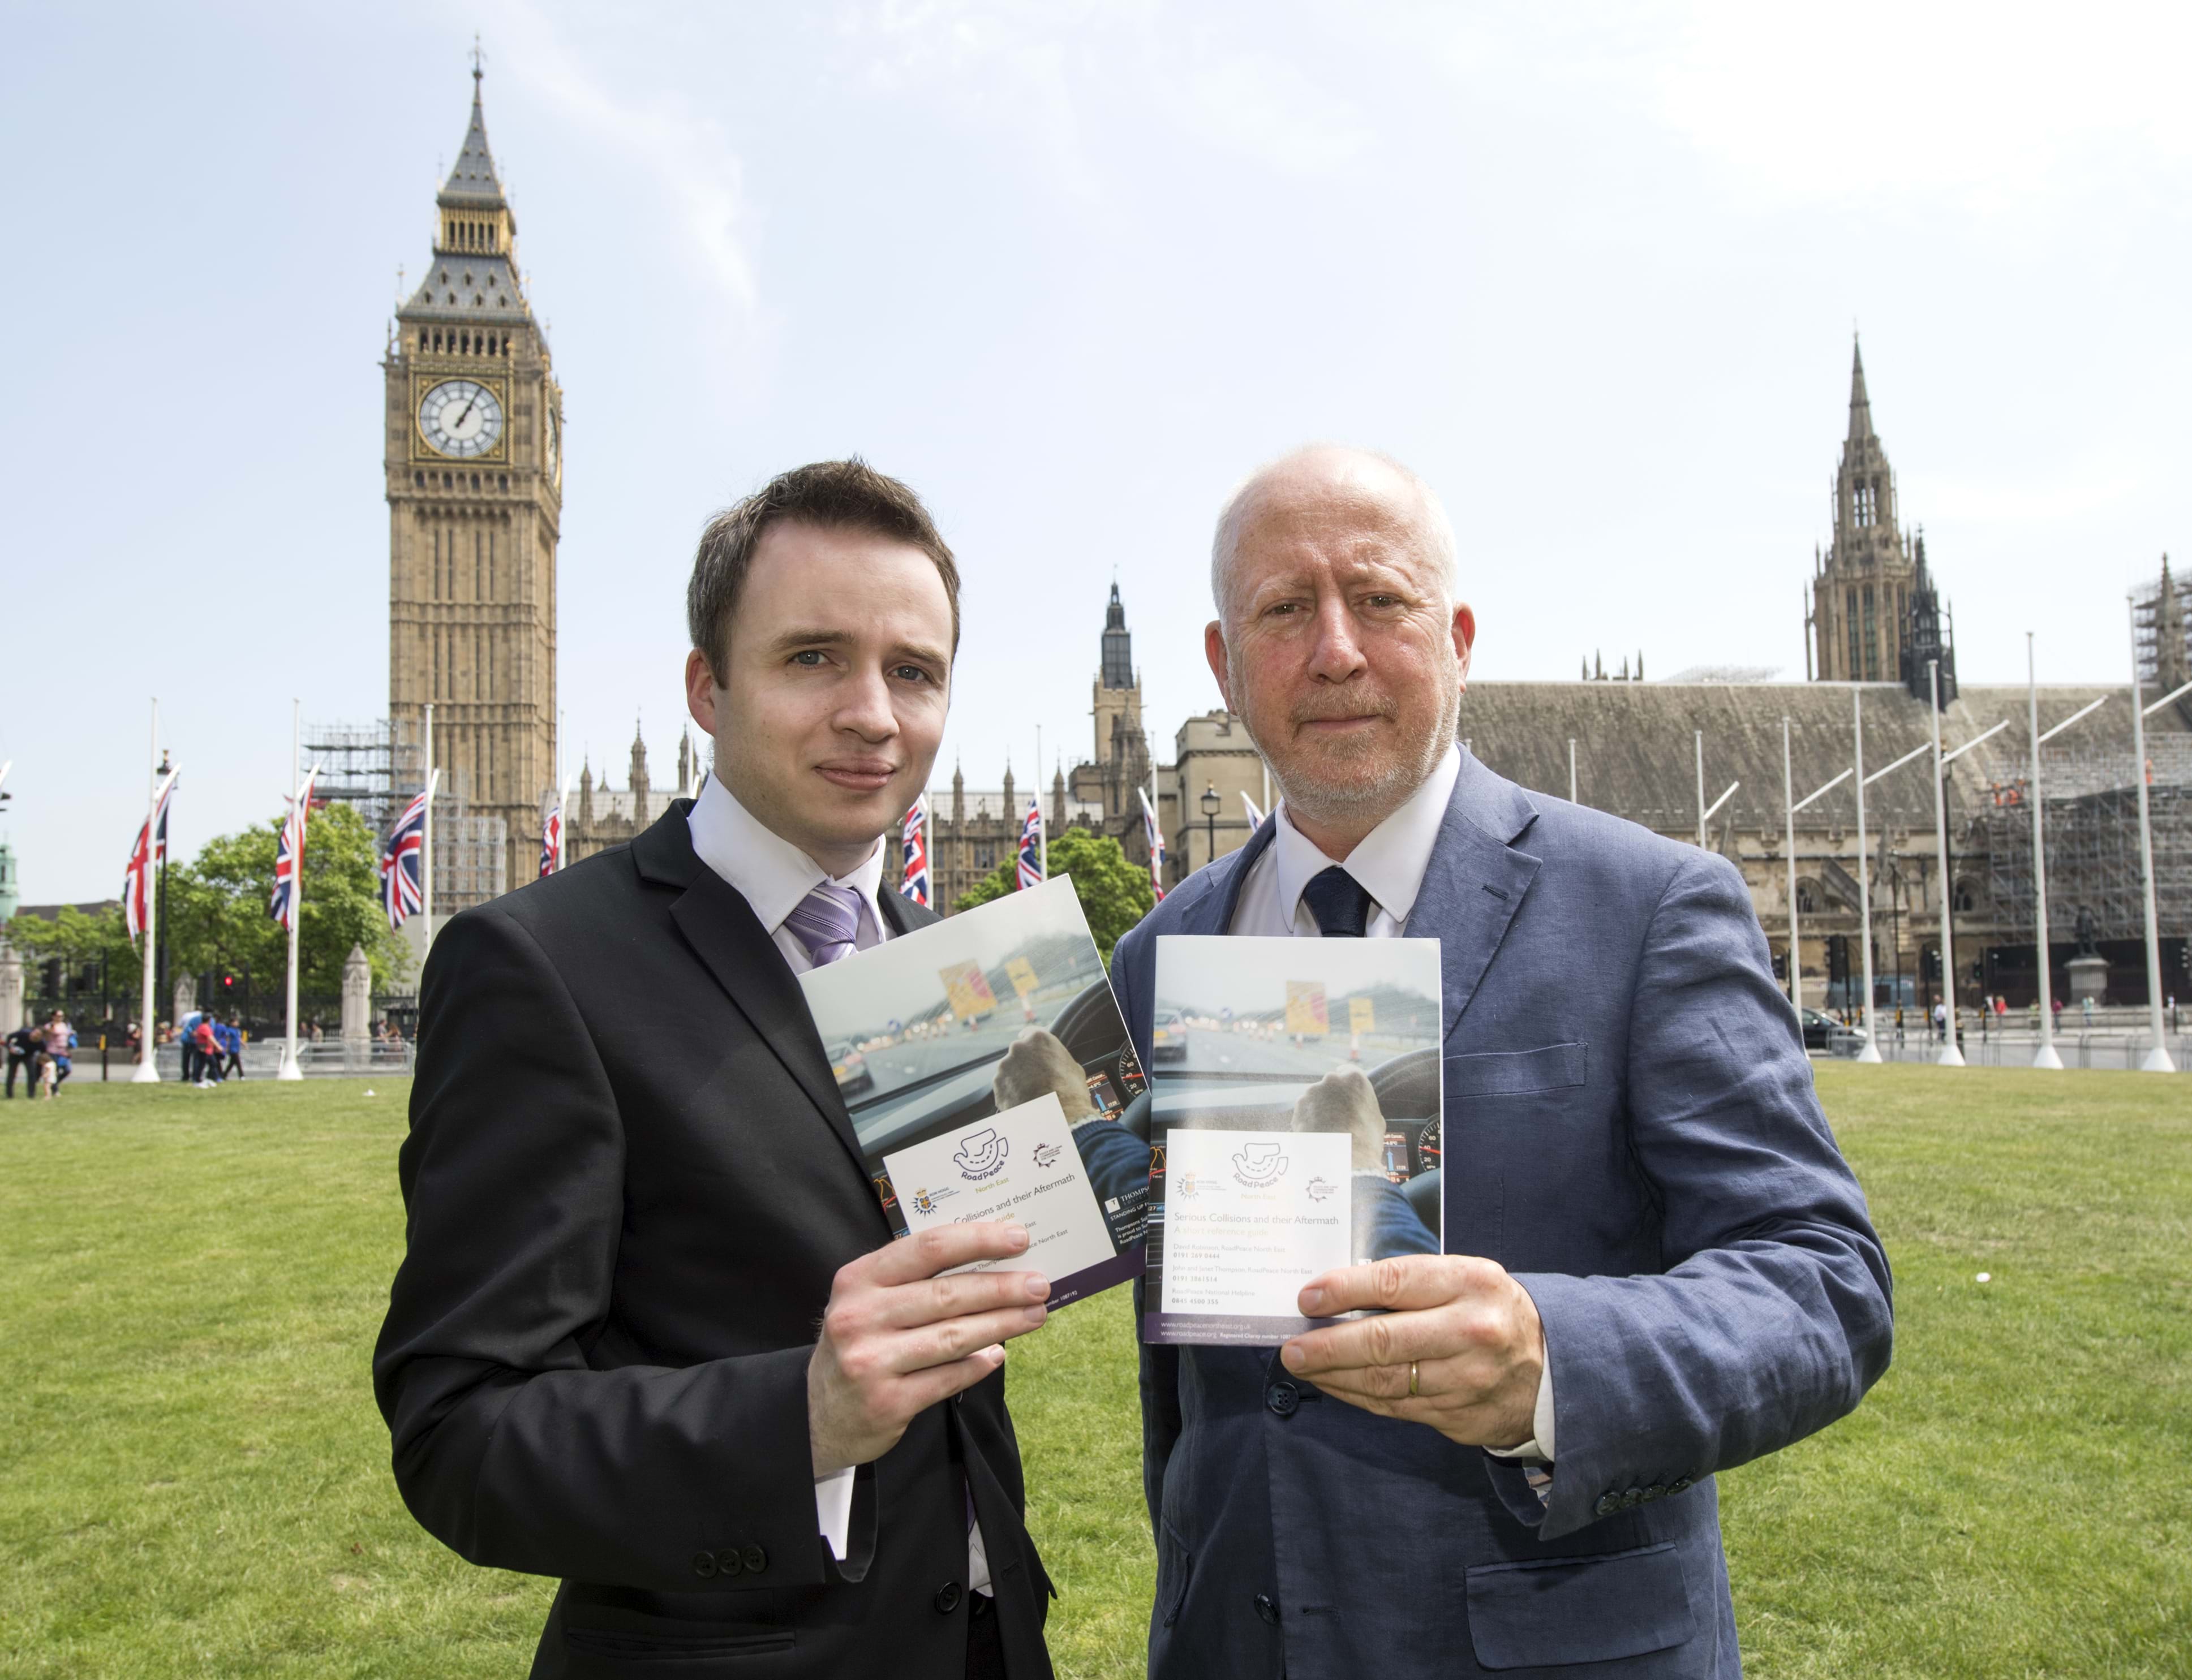 David Robinson, of Thompsons Solicitors, and Andy McDonald MP, at the launch of the RoadPeace guide in Westminster.